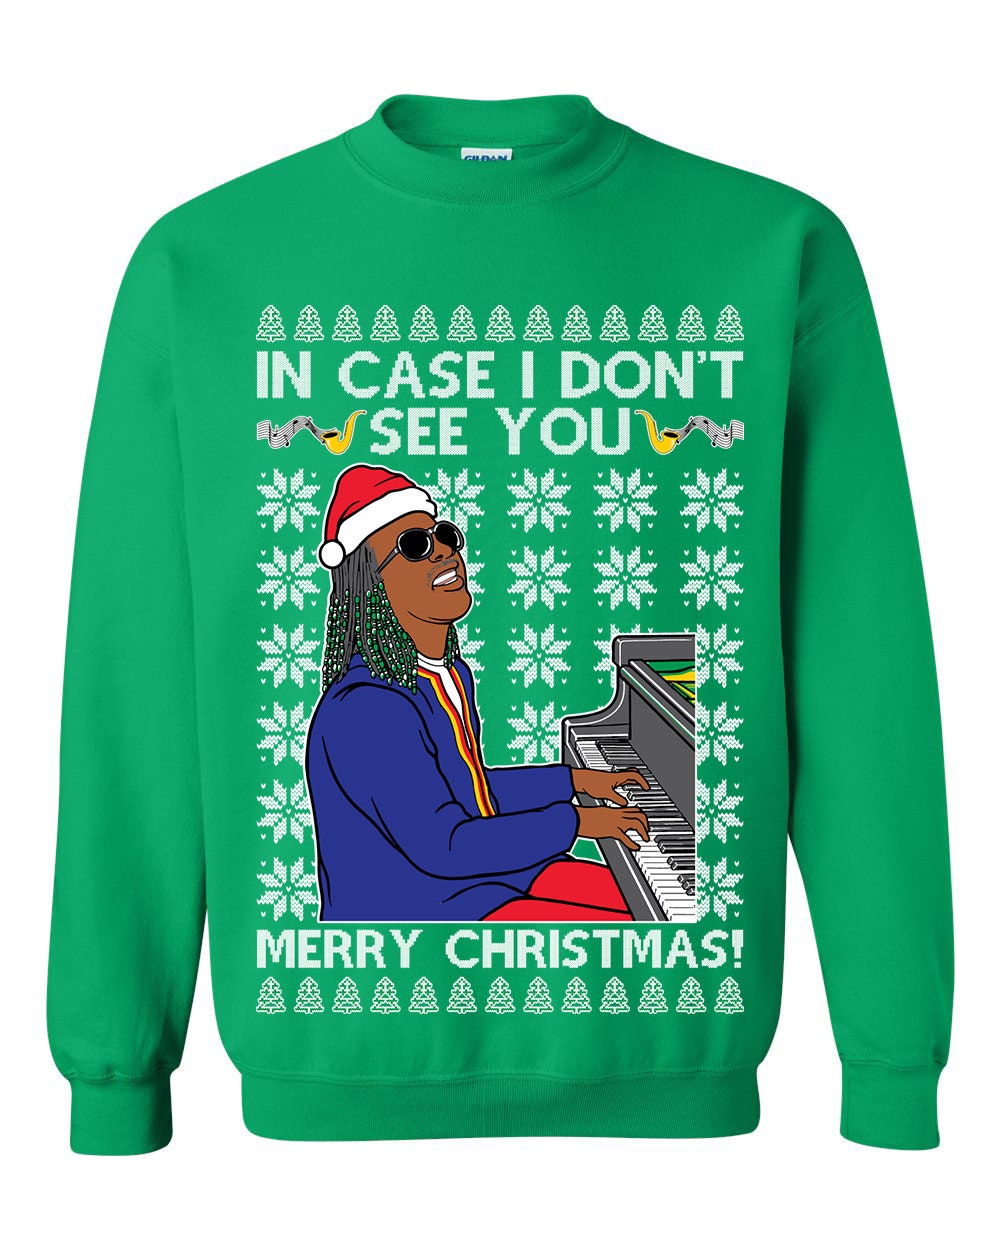 Discover In Case I Don't See You Merry Christmas Ugly Christmas Sweater